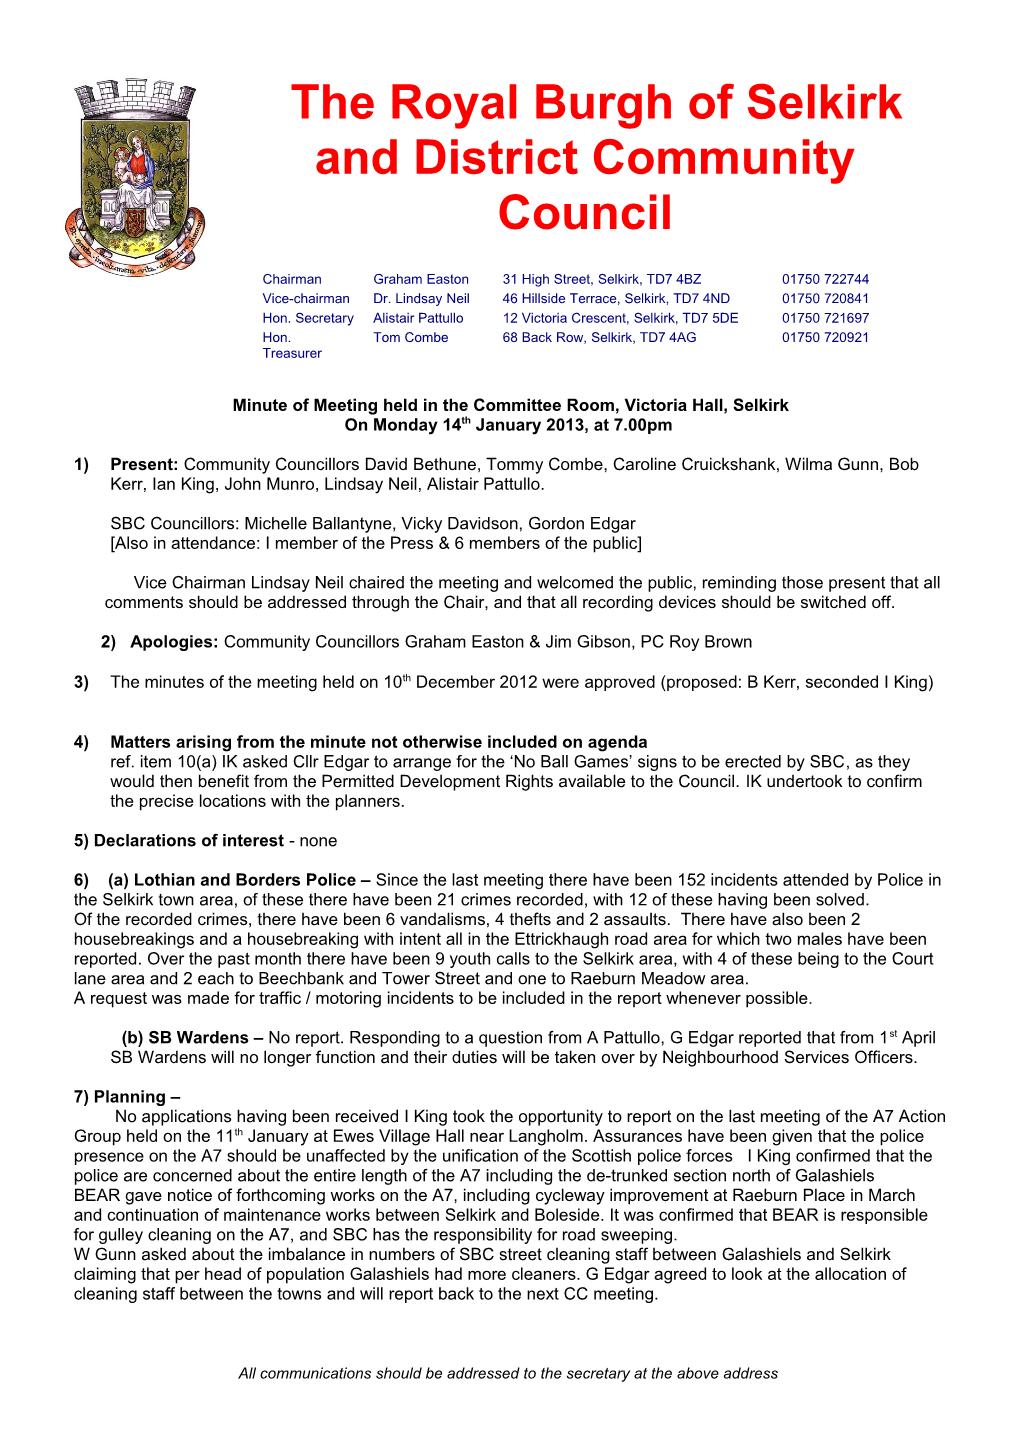 The Royal Burgh of Selkirk and District Community Council s3